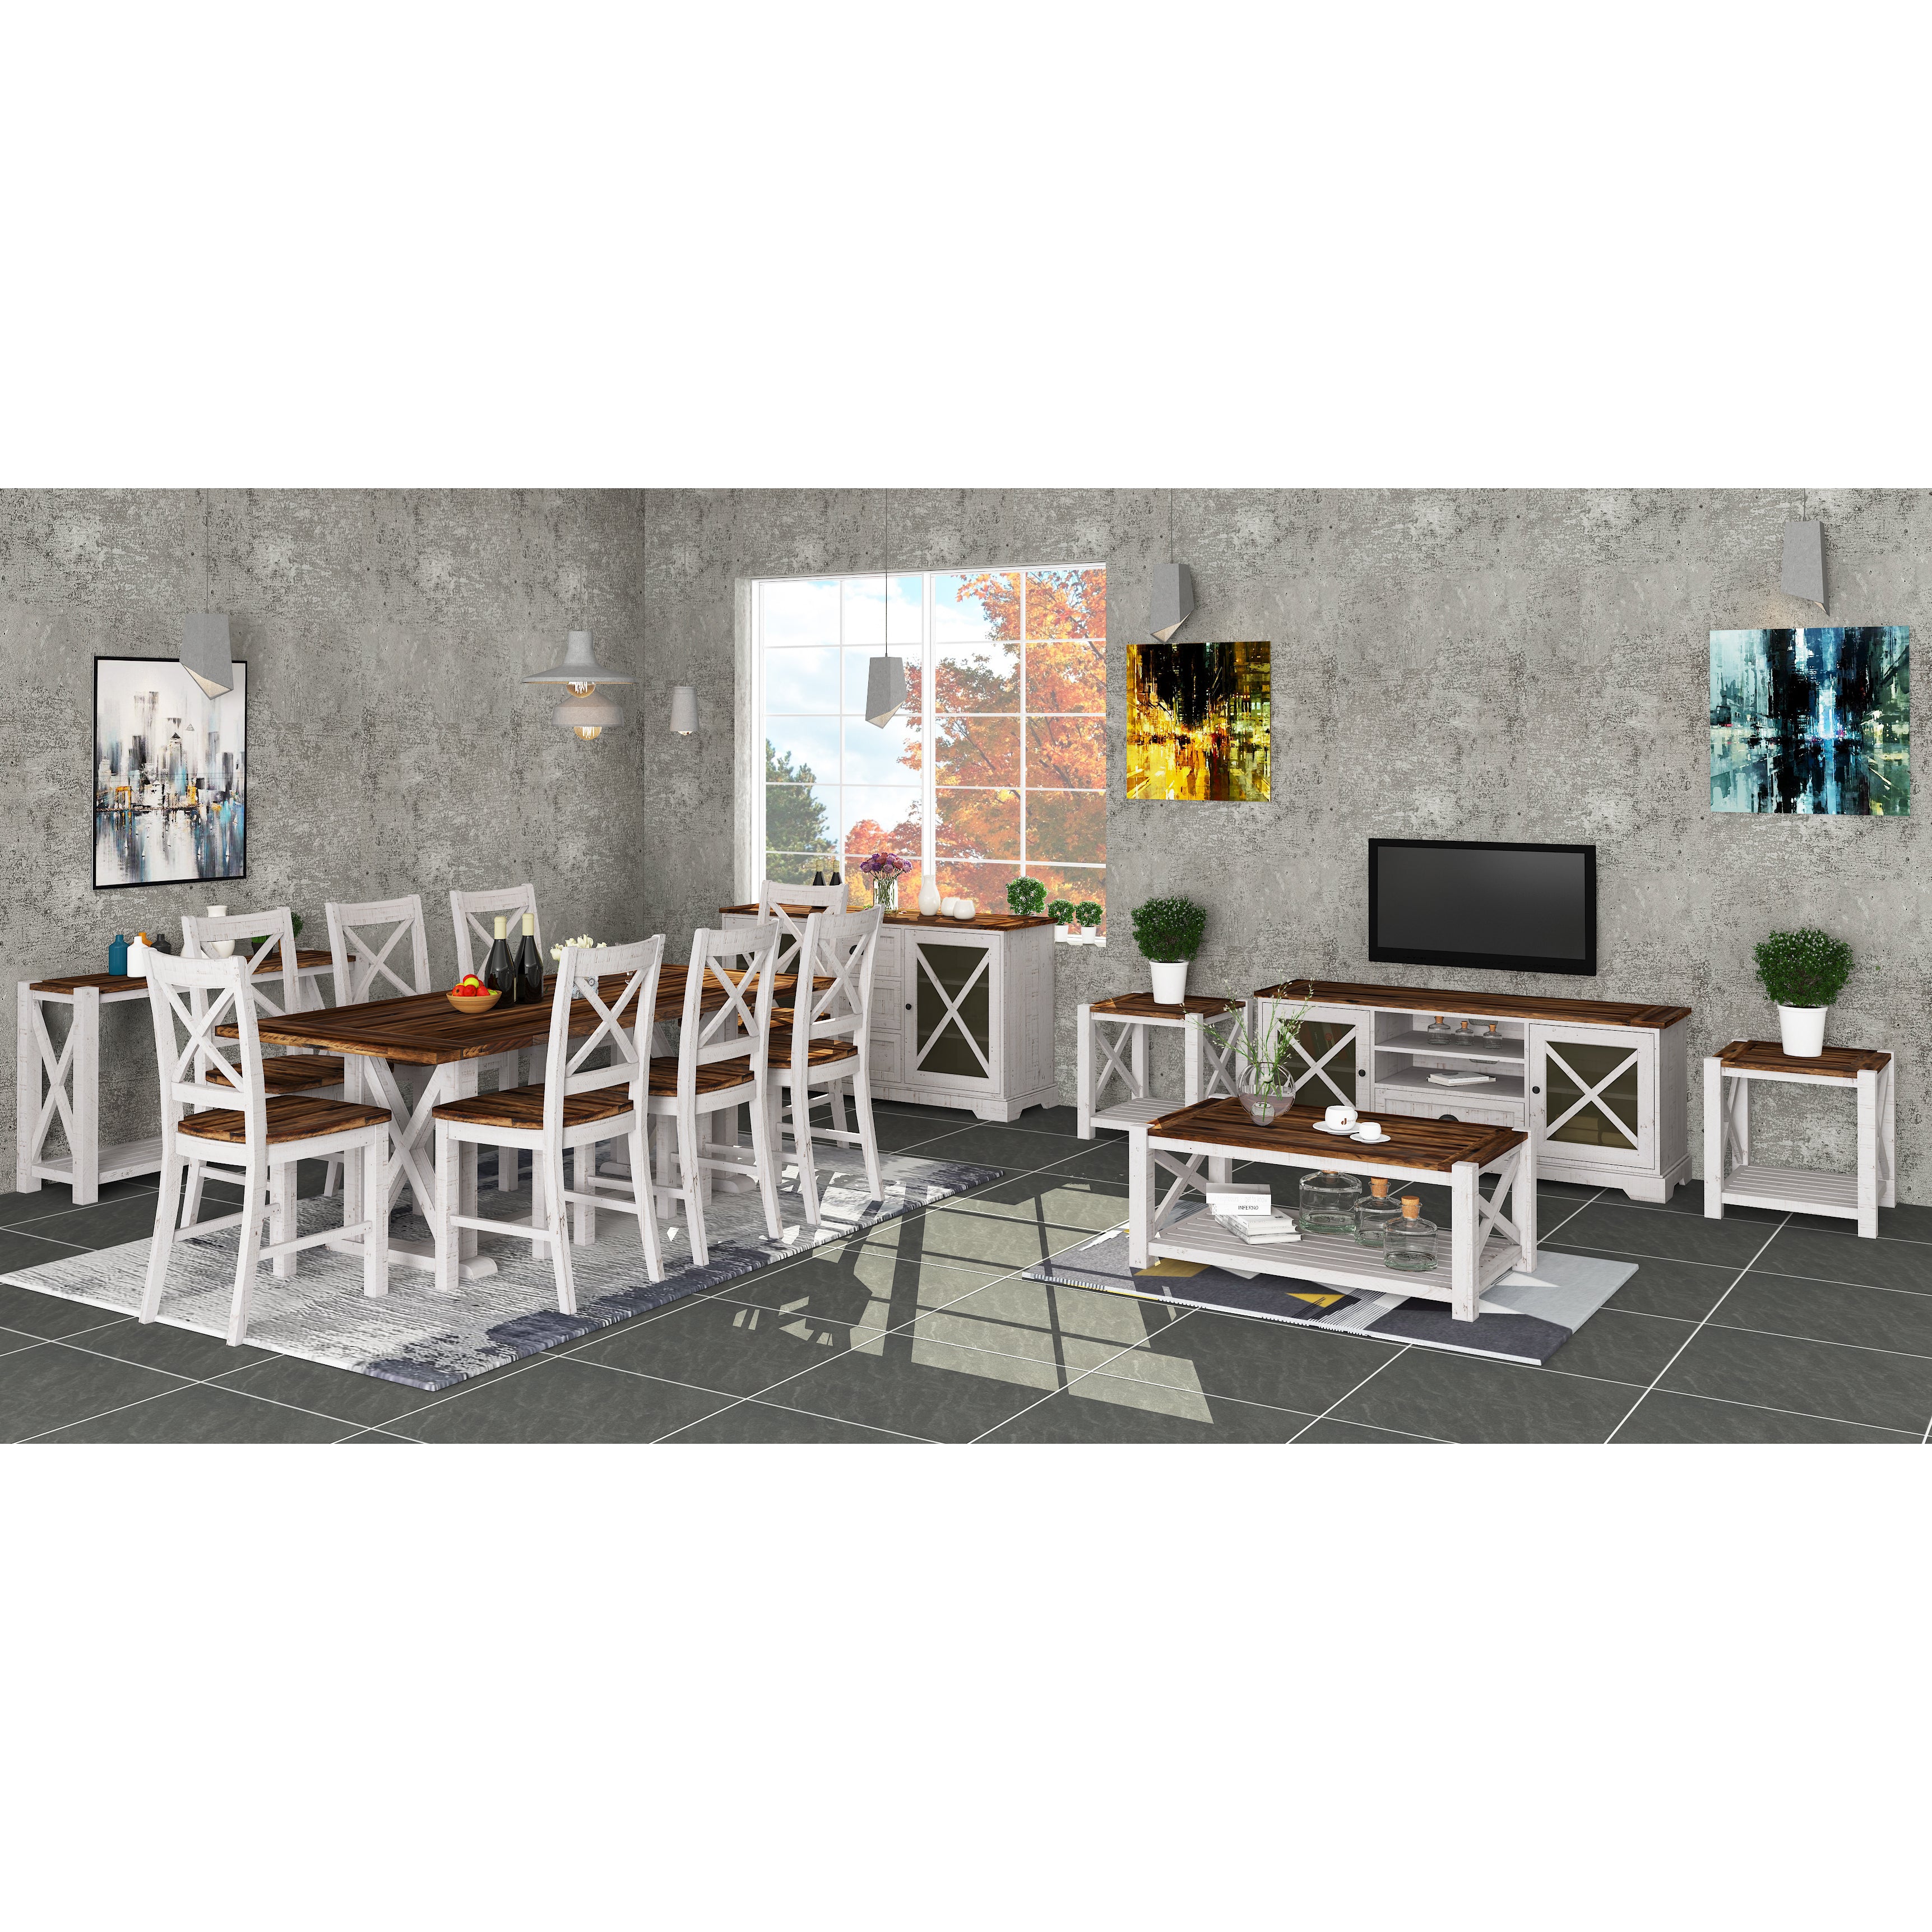 Erica 9pc Dining Set 240cm Table 8 Chair Solid Acacia Wood Timber Brown White - SILBERSHELL